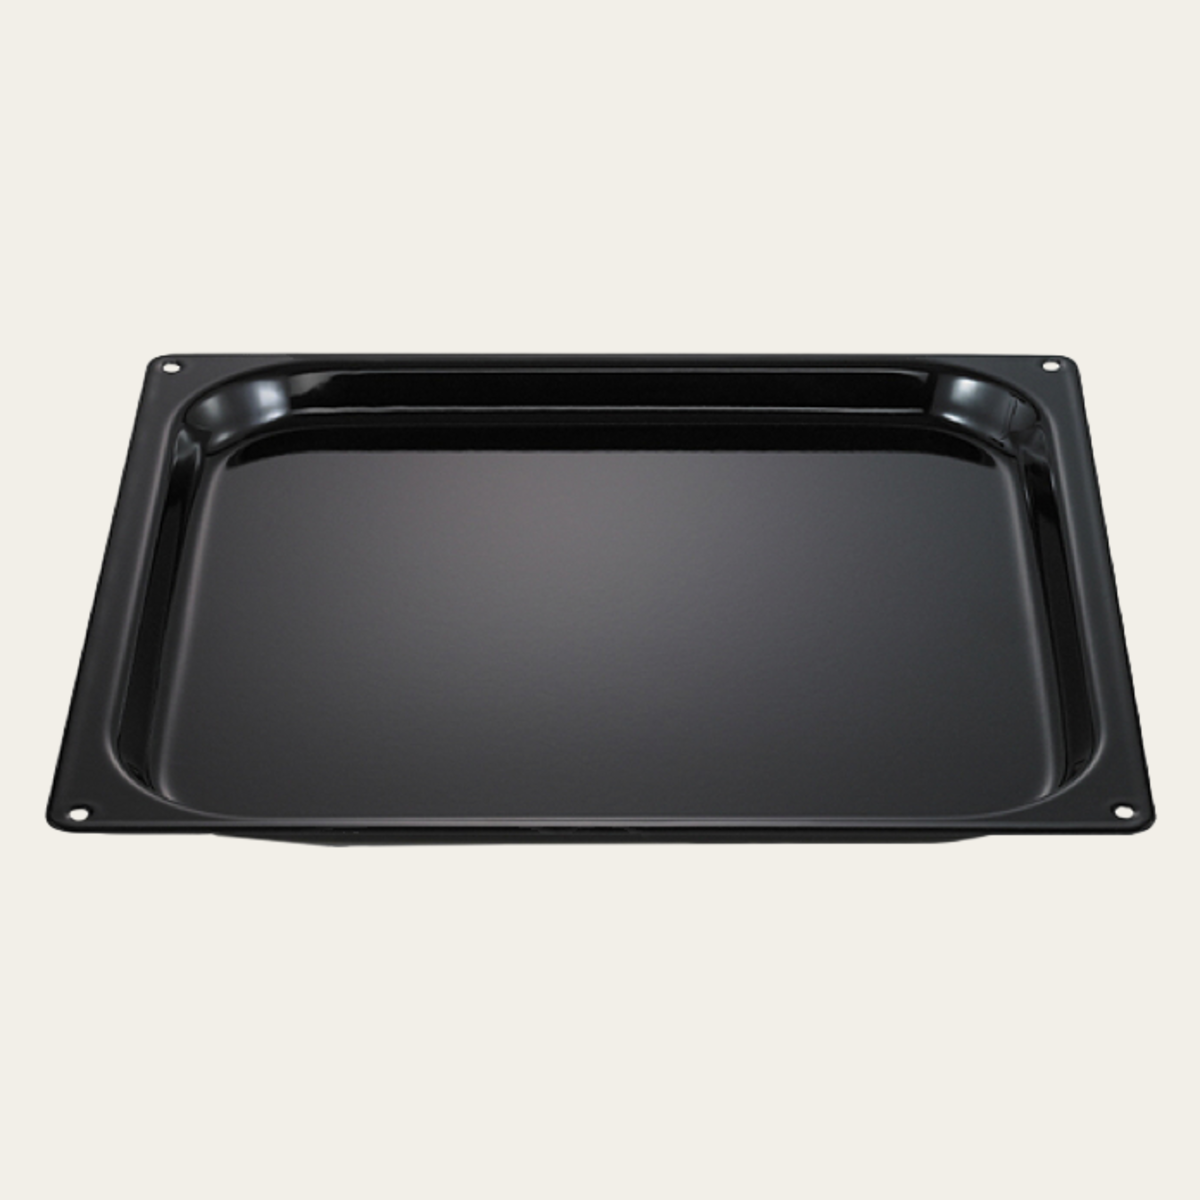 Enamelled baking tray (2/3 GN), height 20mm